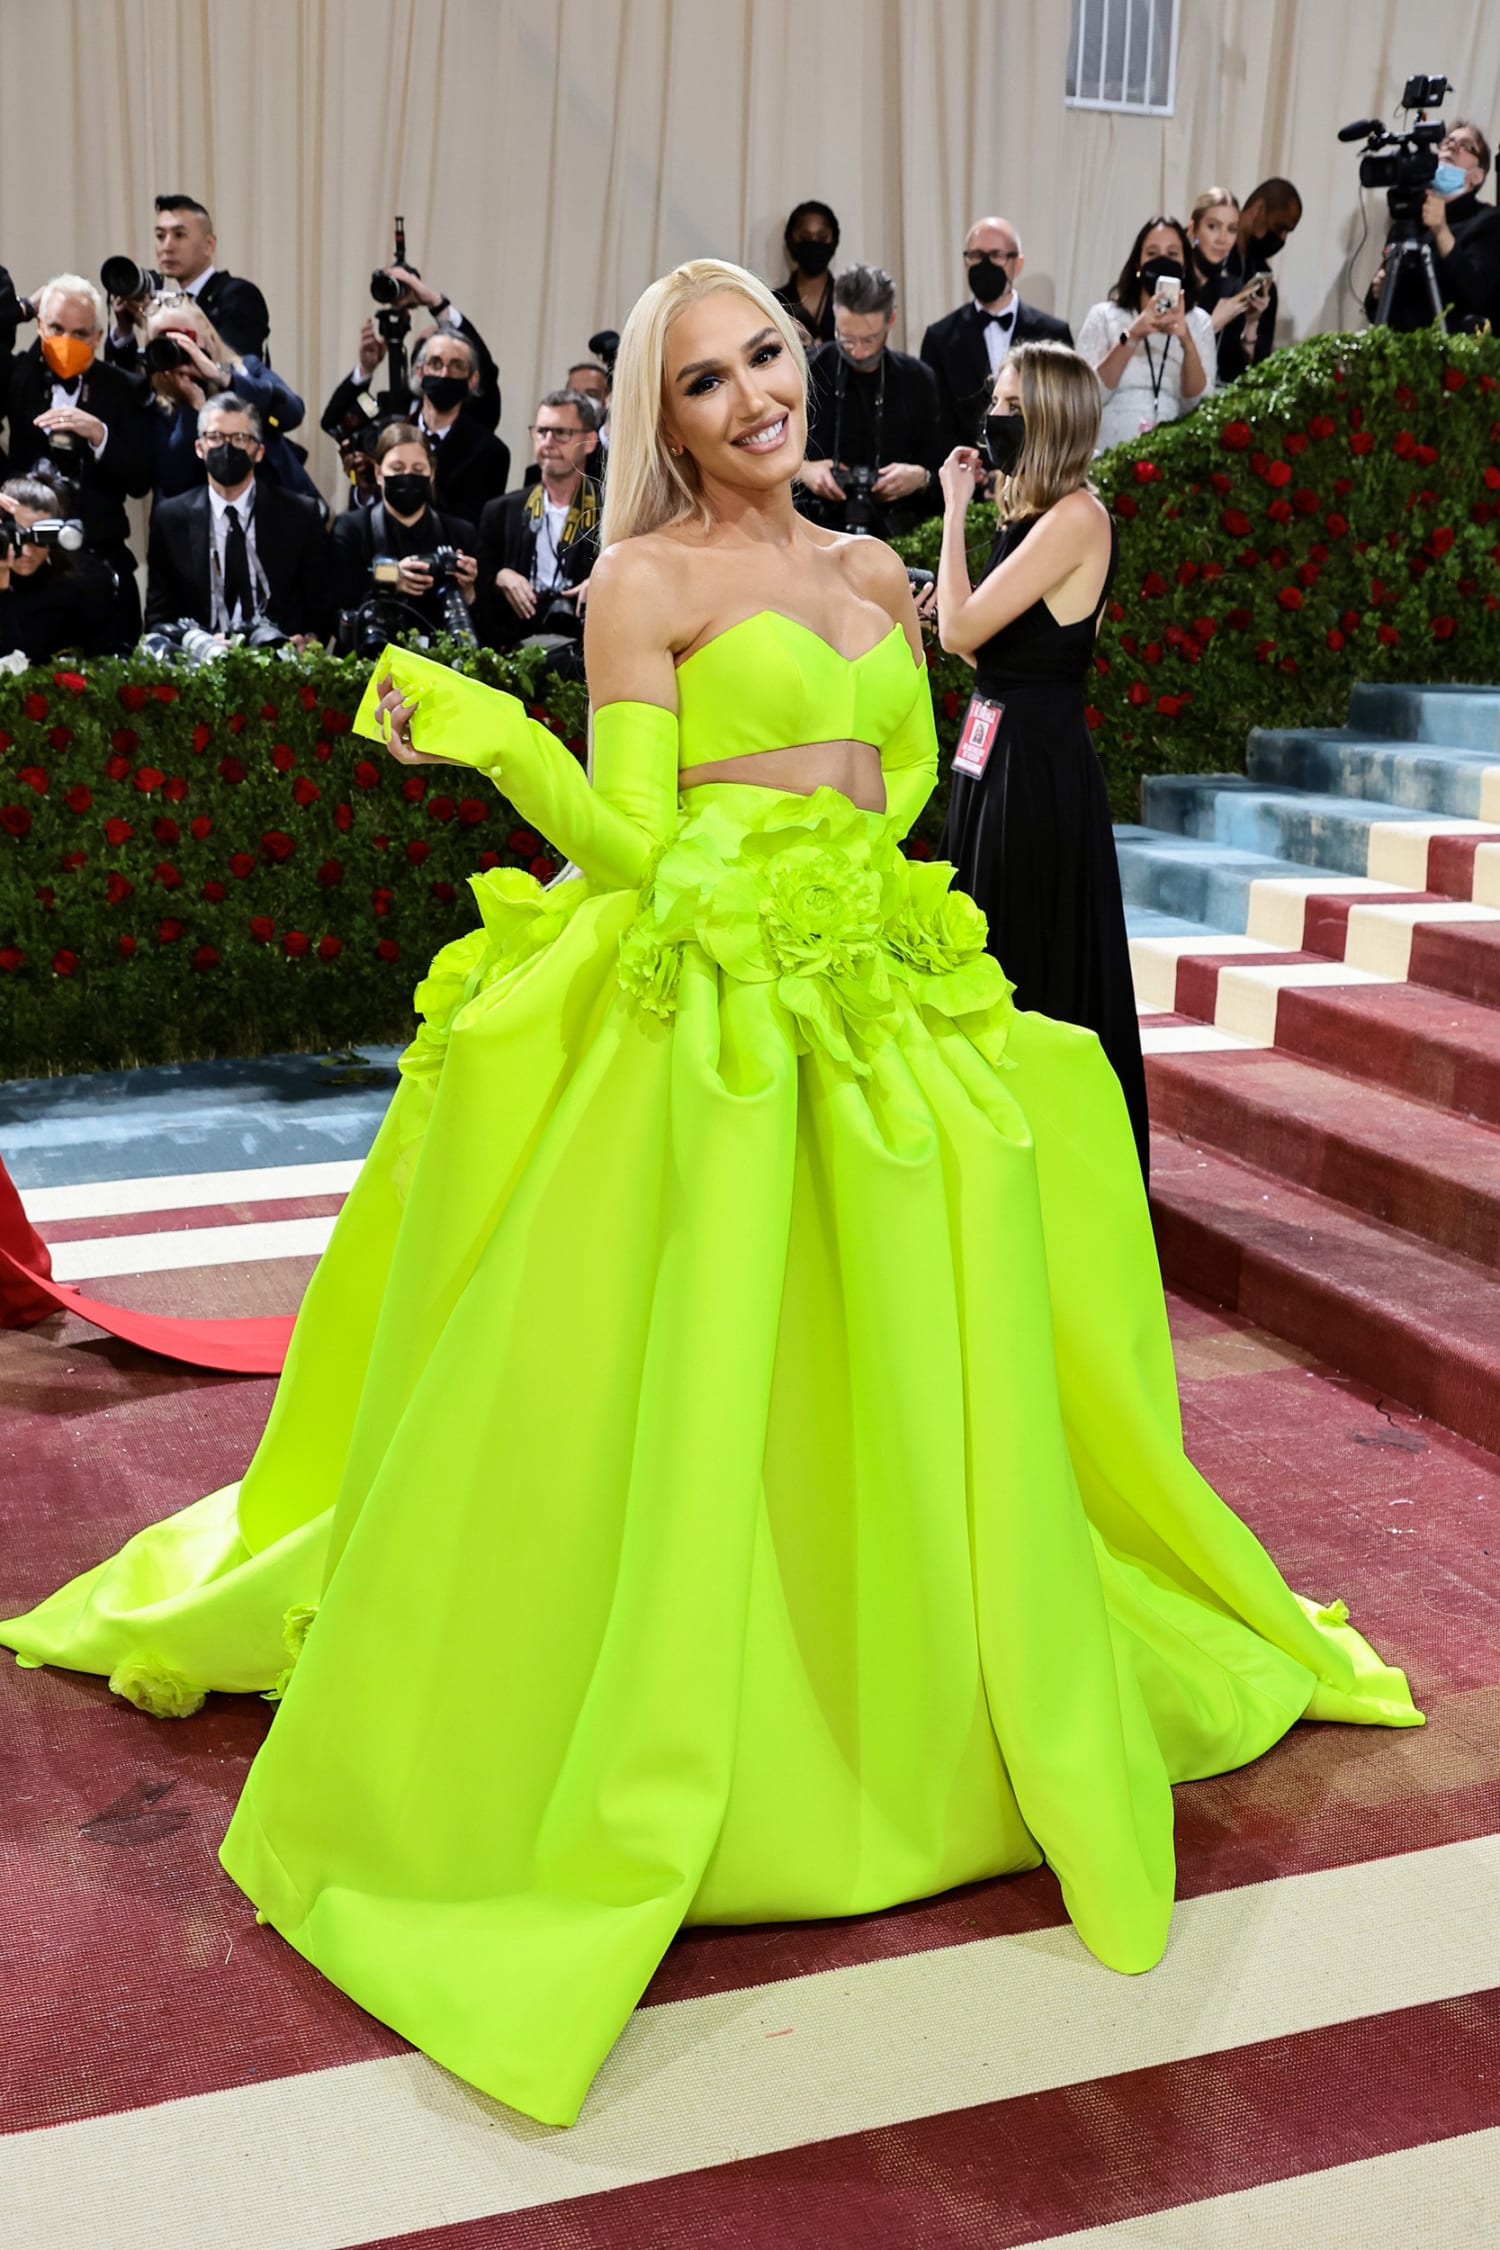 2022 Met Gala: The Most Outrageous Looks